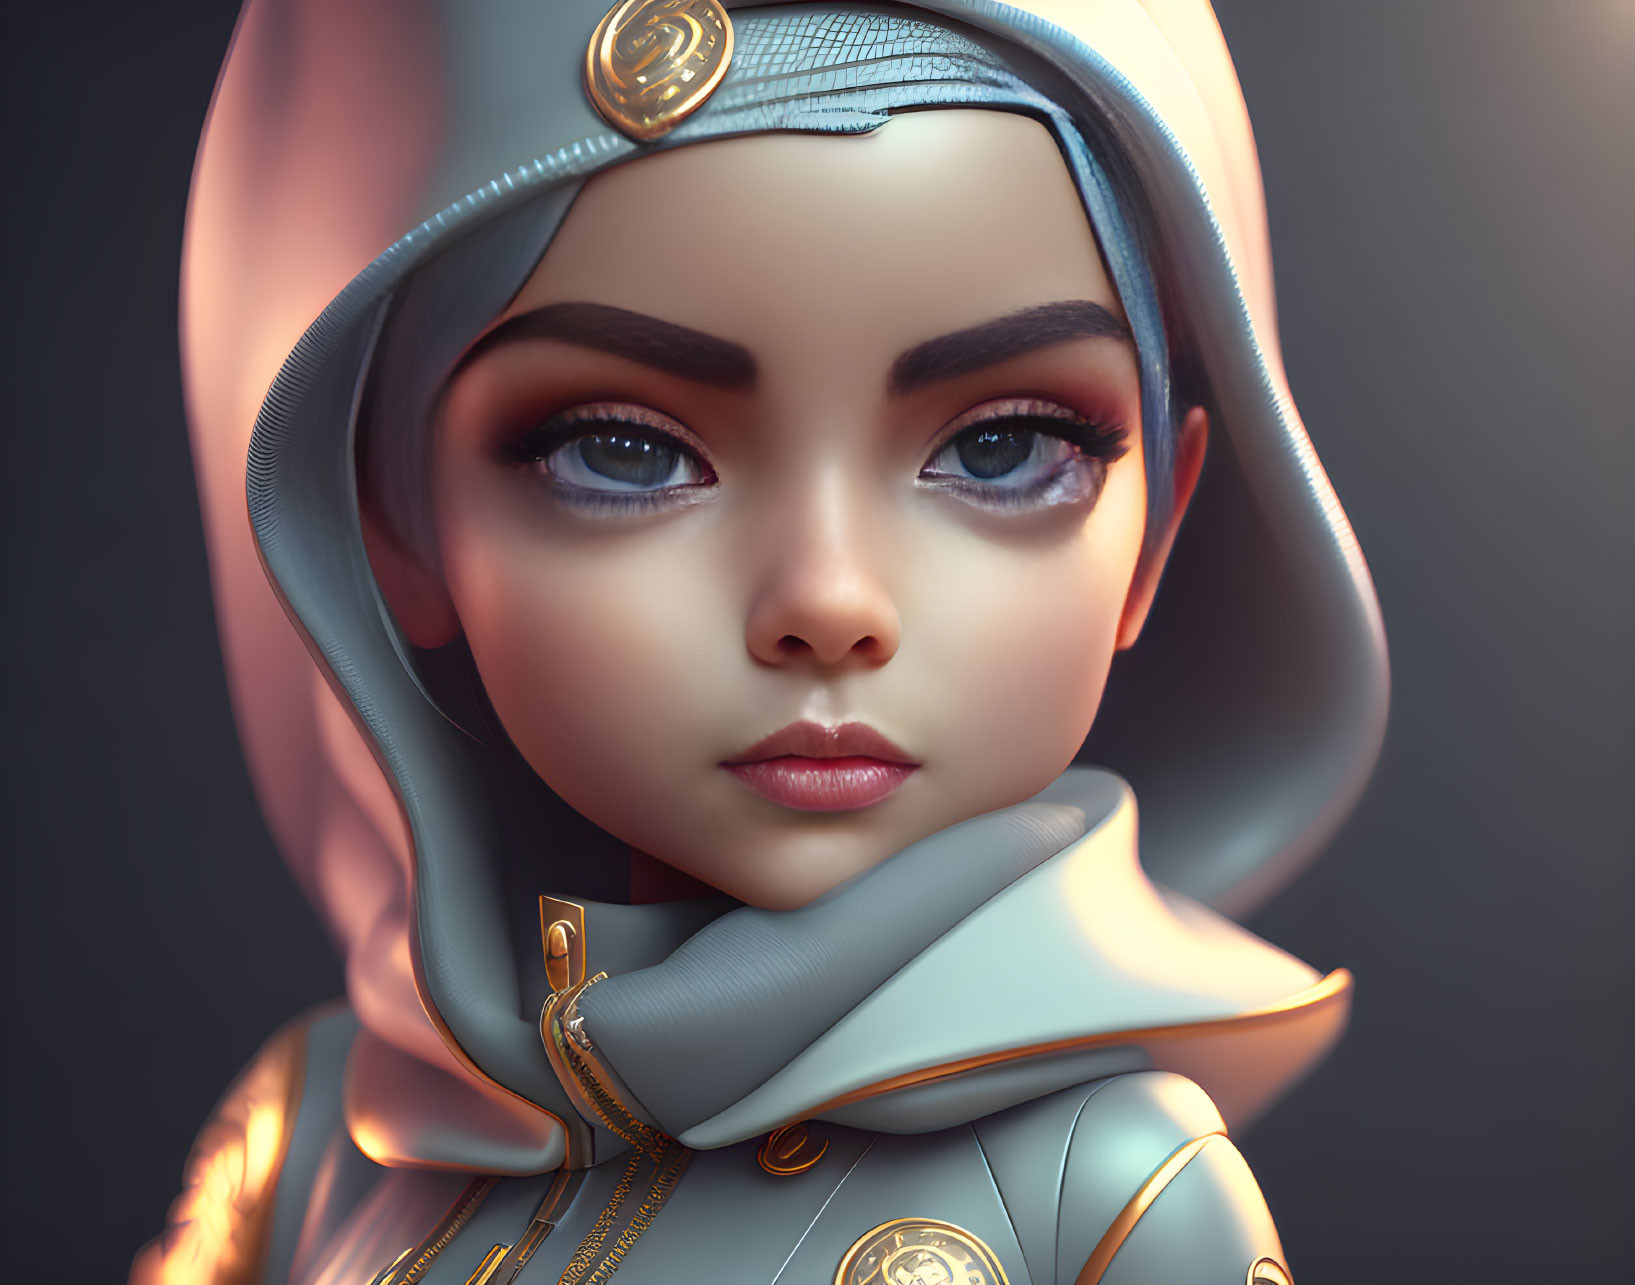 Digital portrait of female character in futuristic hooded outfit with gold accents